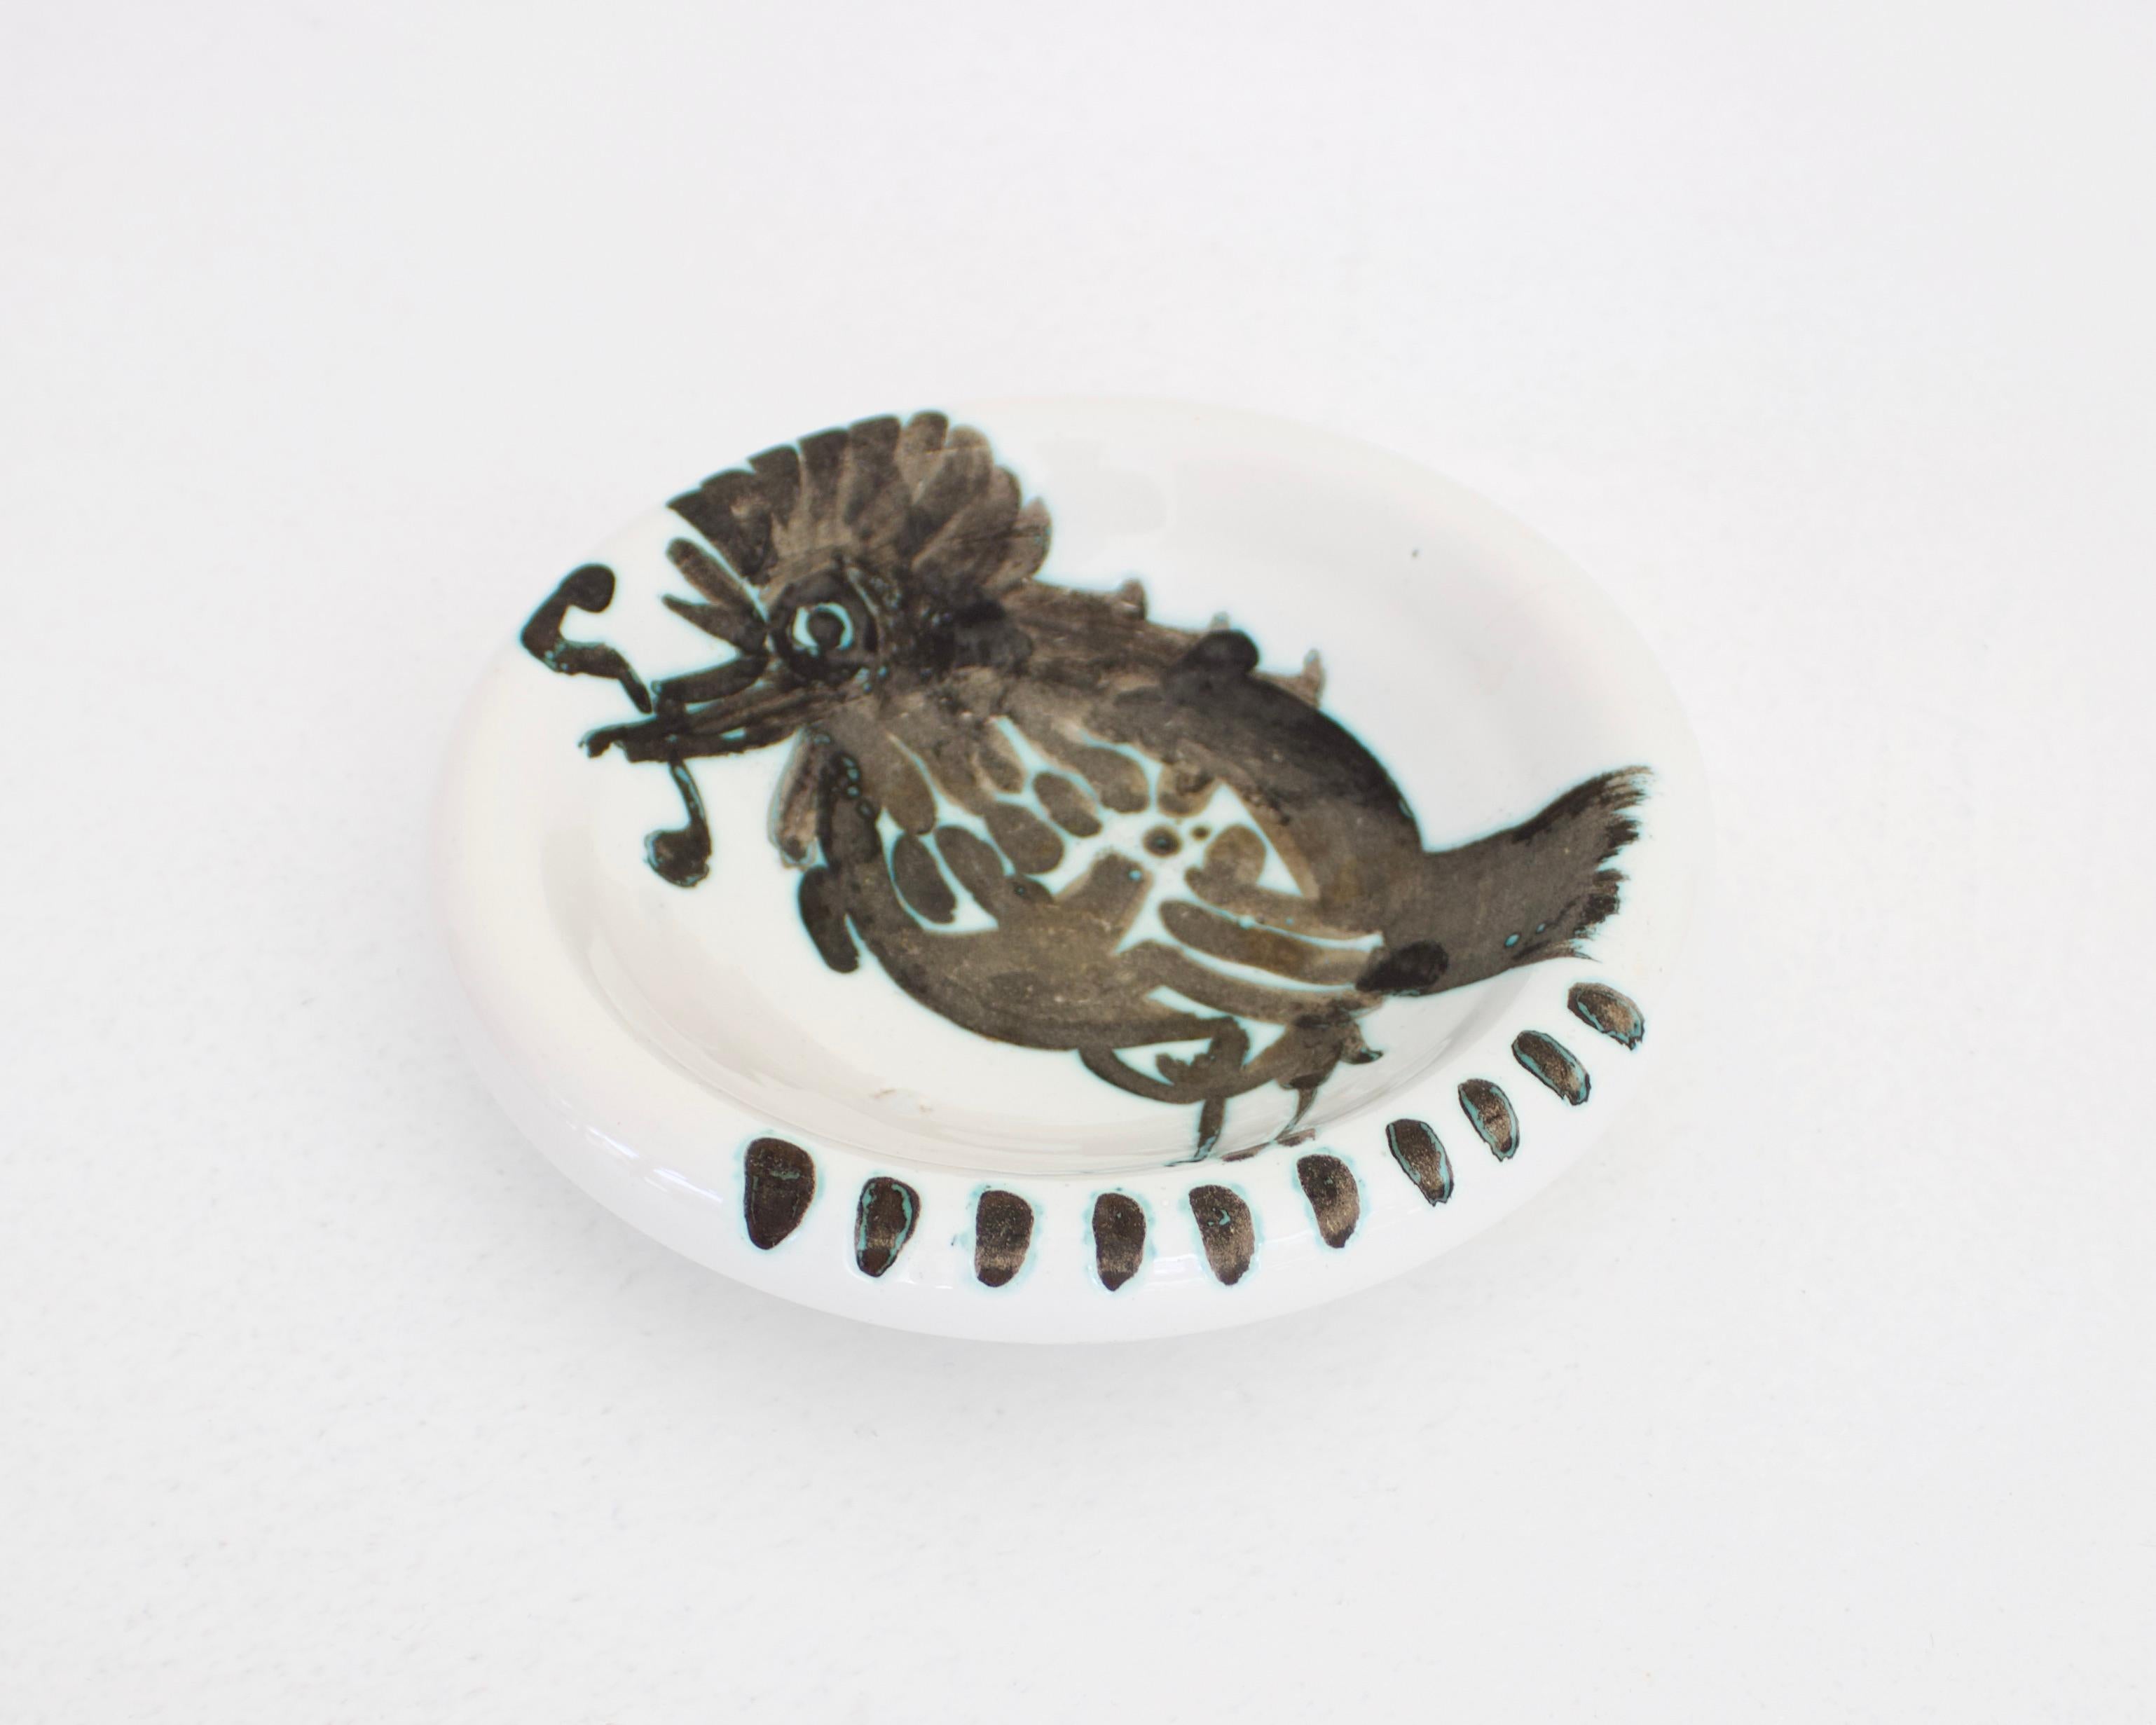 French Pablo Picasso Ceramic Dish Editions Picasso Madoura Bird With With Worm 1952